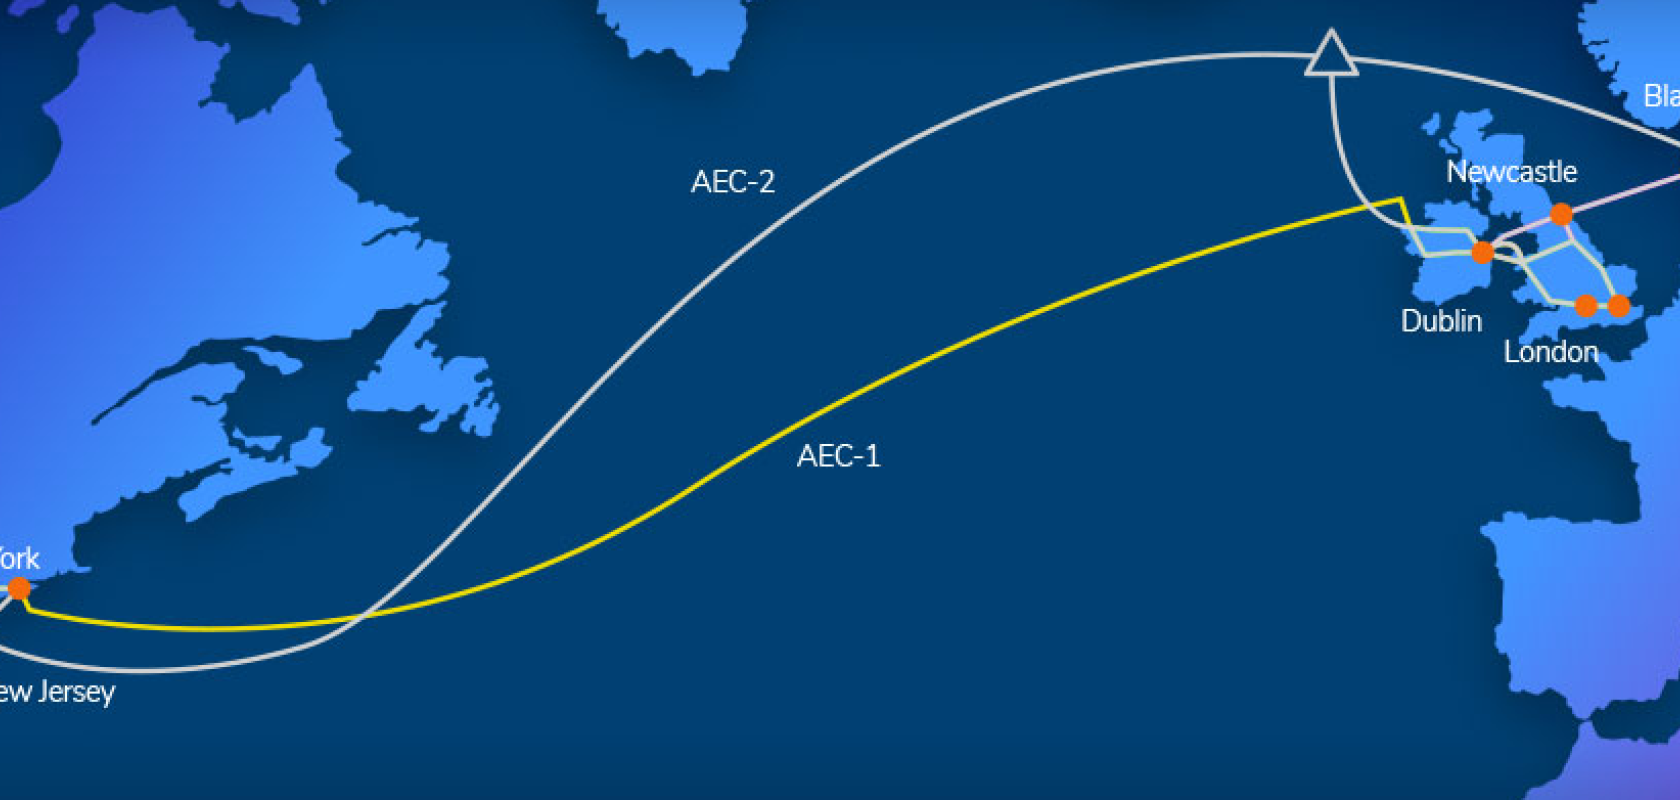 Aqua Comms signed a long-term lease agreement for Trans-Atlantic subsea spectrum with ESnet